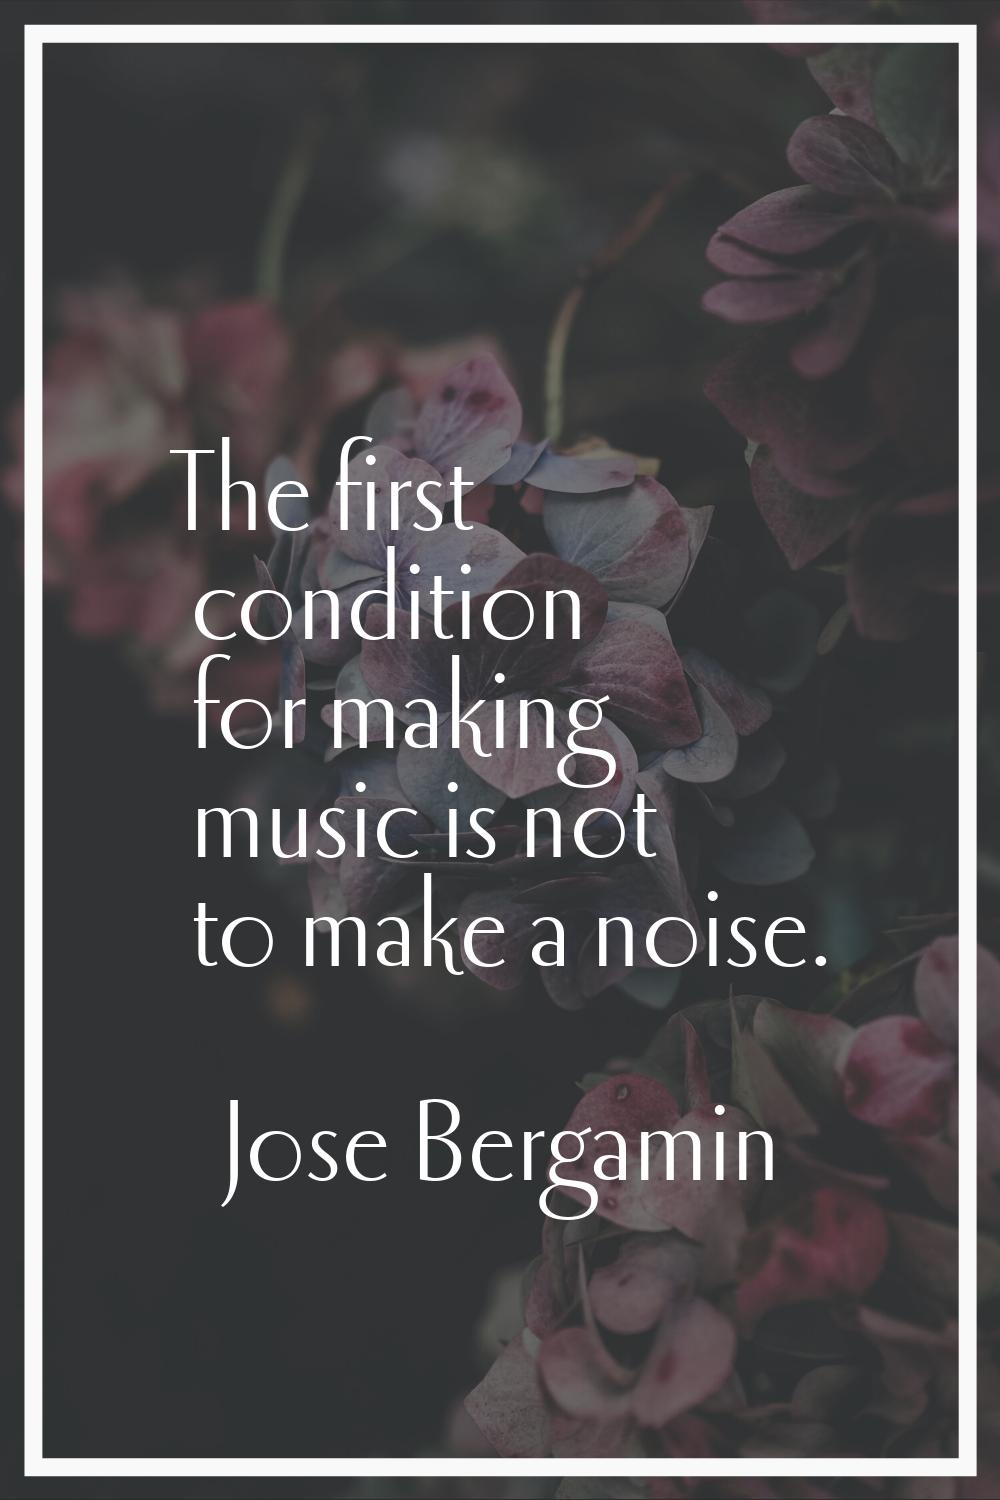 The first condition for making music is not to make a noise.